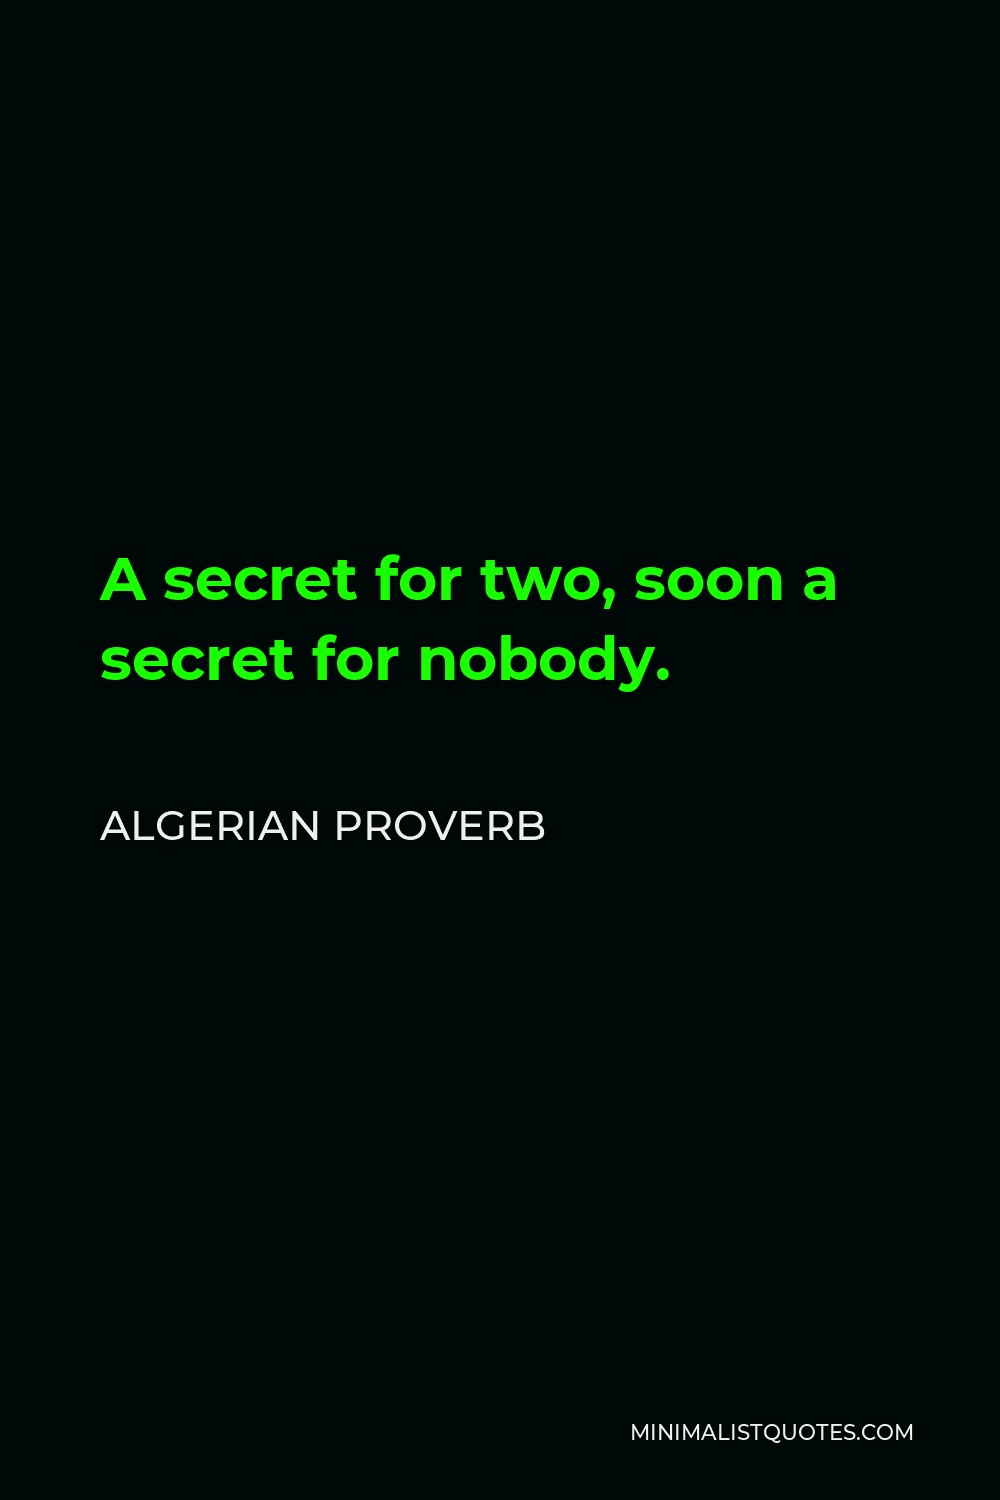 Algerian Proverb Quote - A secret for two, soon a secret for nobody.